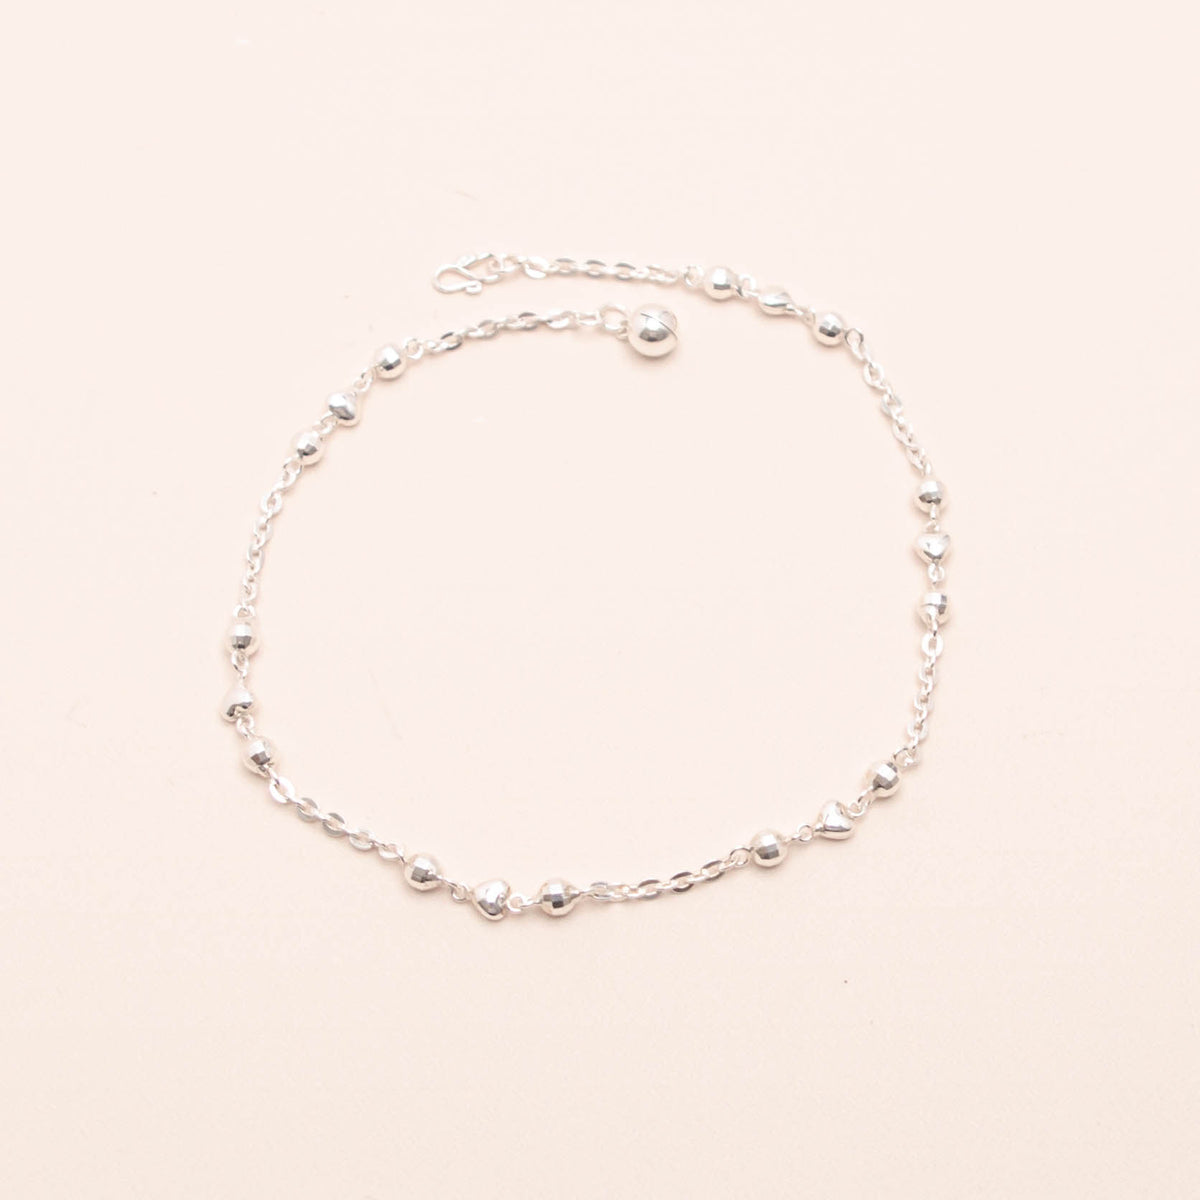 Mix Disco Beads Chain Anklet